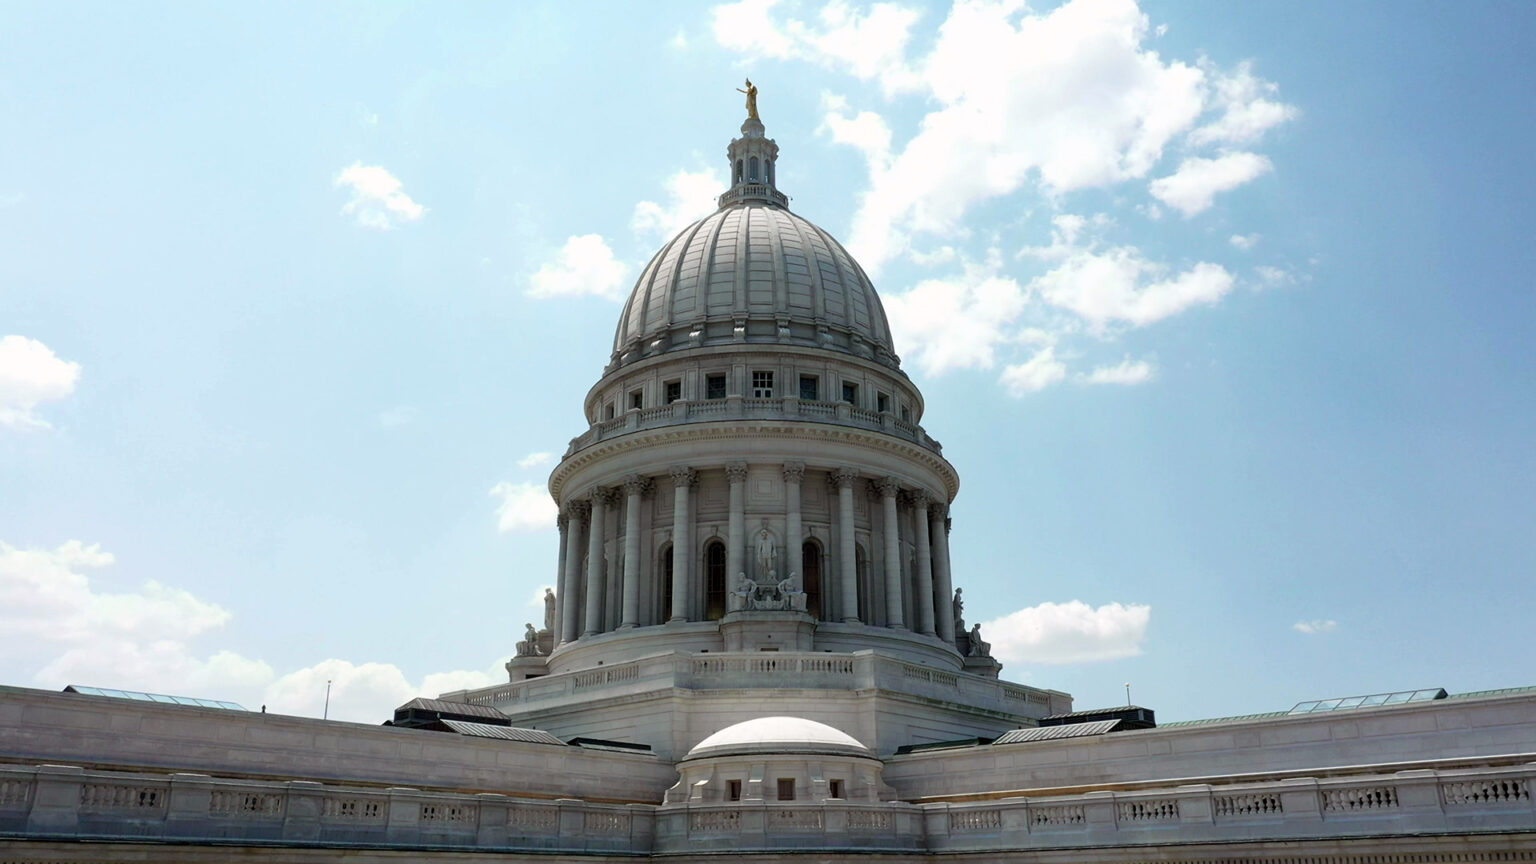 The Wisconsin State Capitol dome and two wings of the building stand under a sky with some clouds.